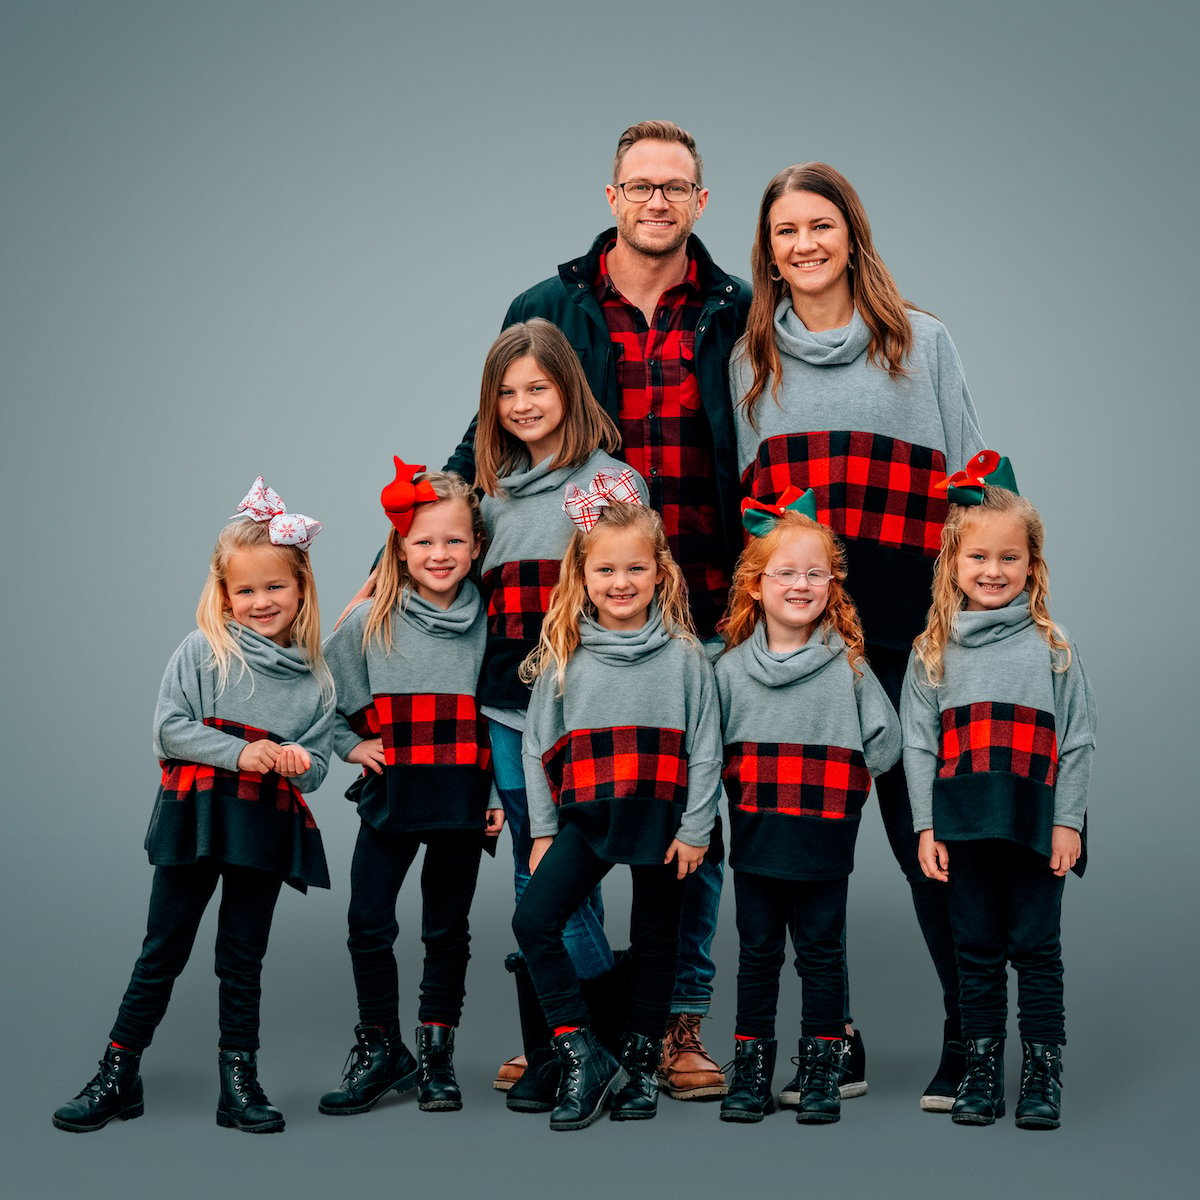 Portrait of Adam Busby and Danielle Busby with Blayke and the Busby quints from 'OutDaughtered' on gray background. 